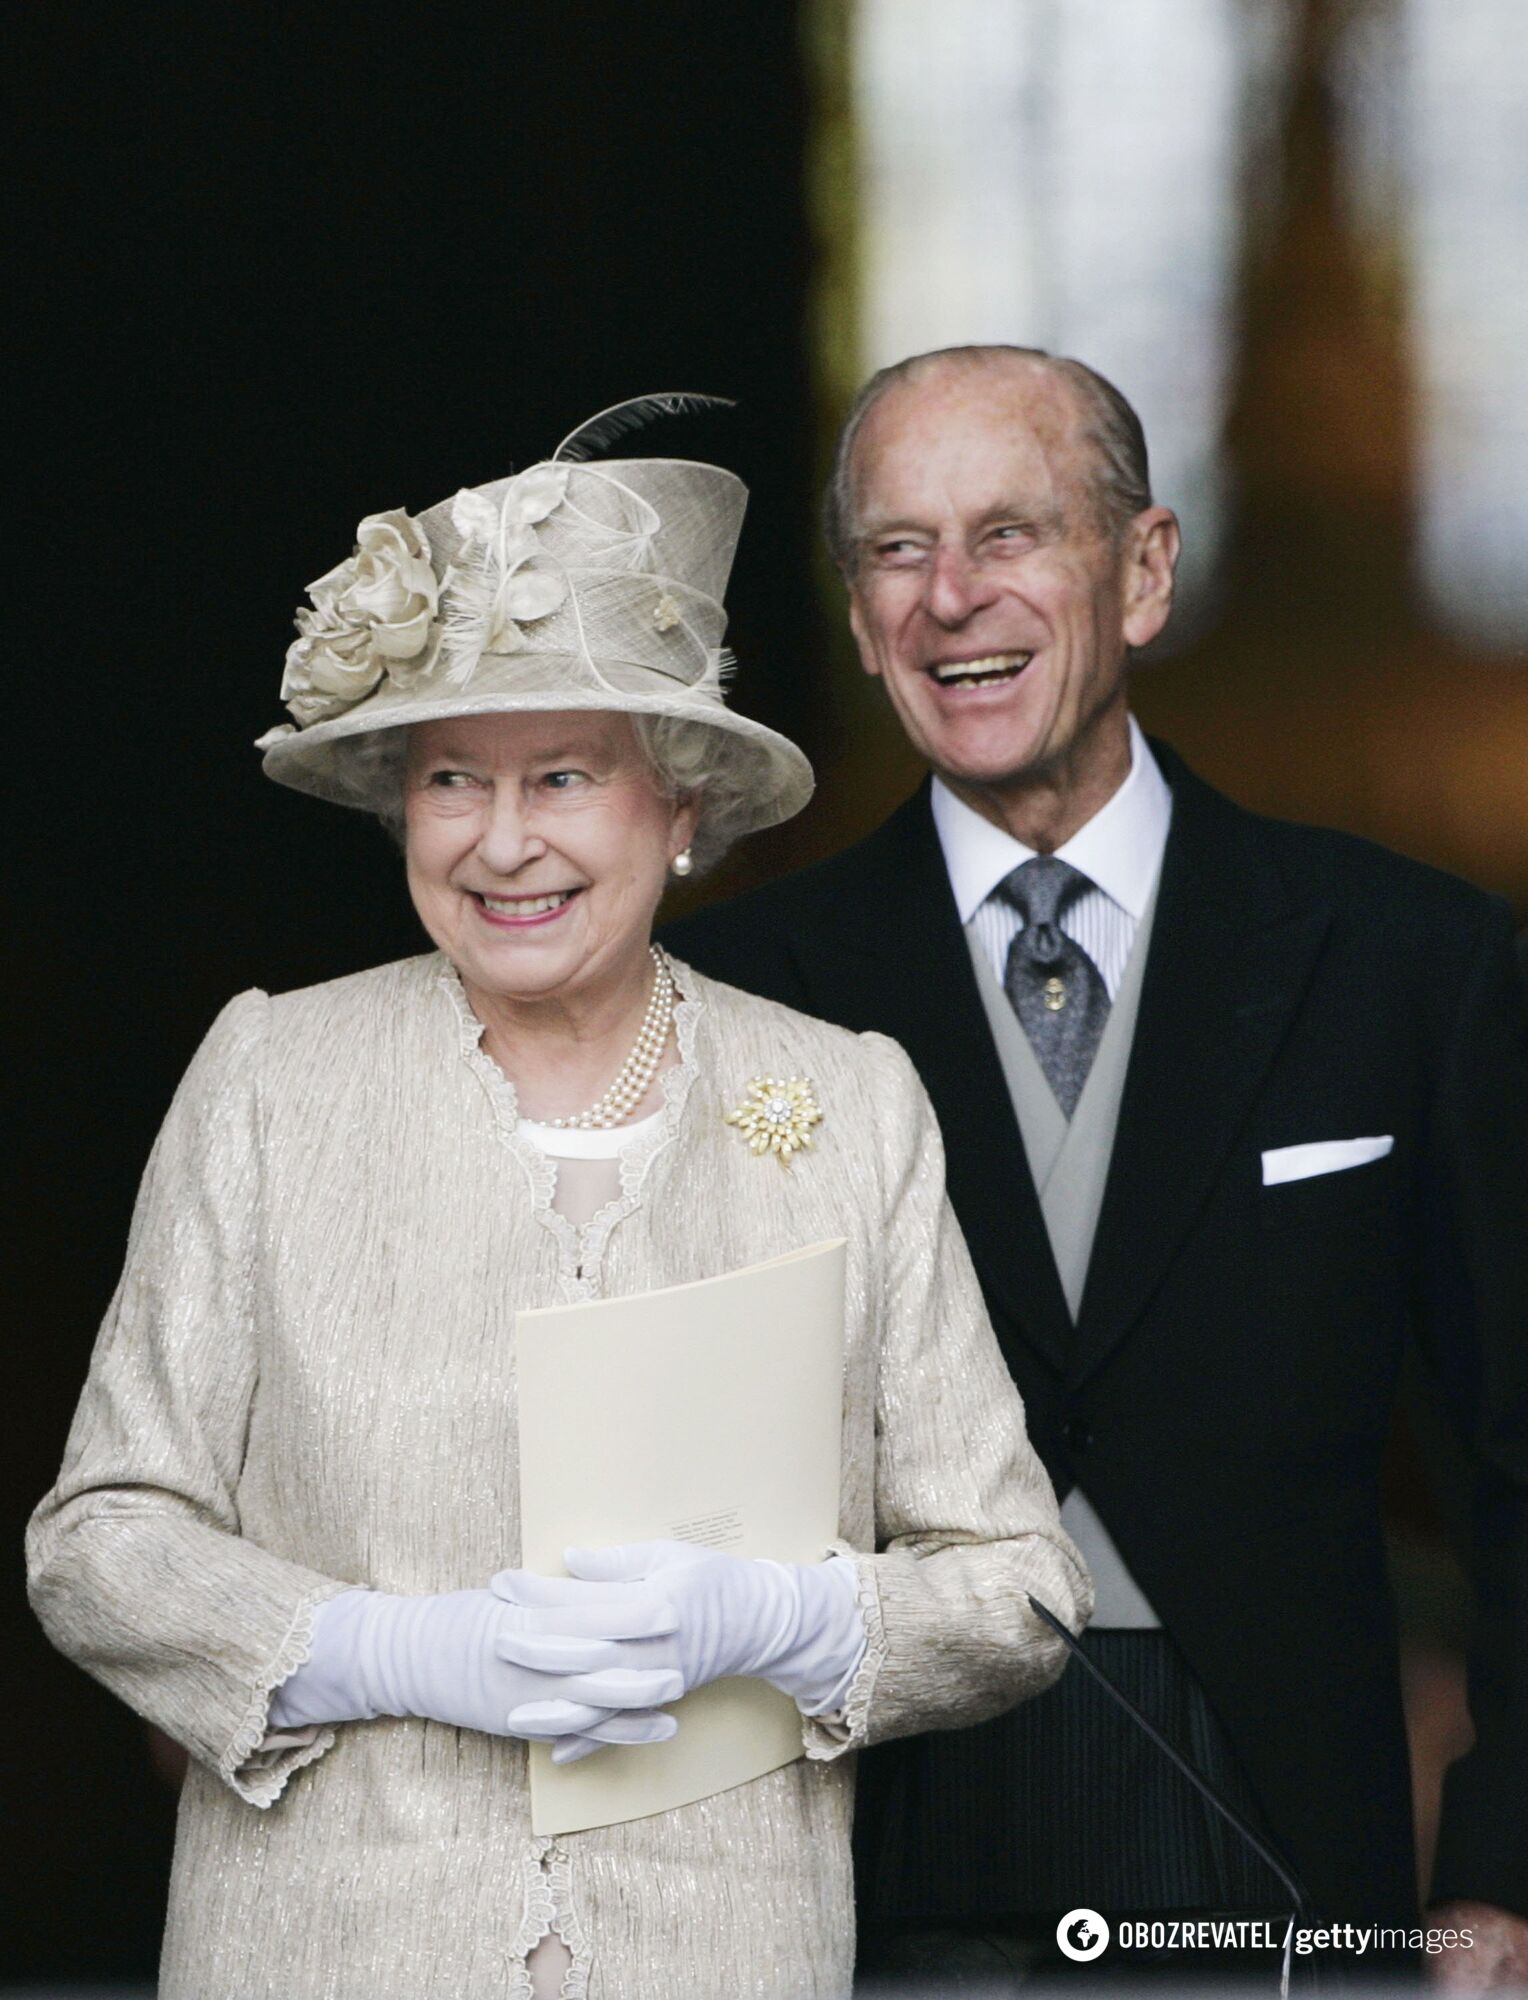 ''Cabbage'', ''wombat'', ''poppet'' and other unexpected nicknames of British royals